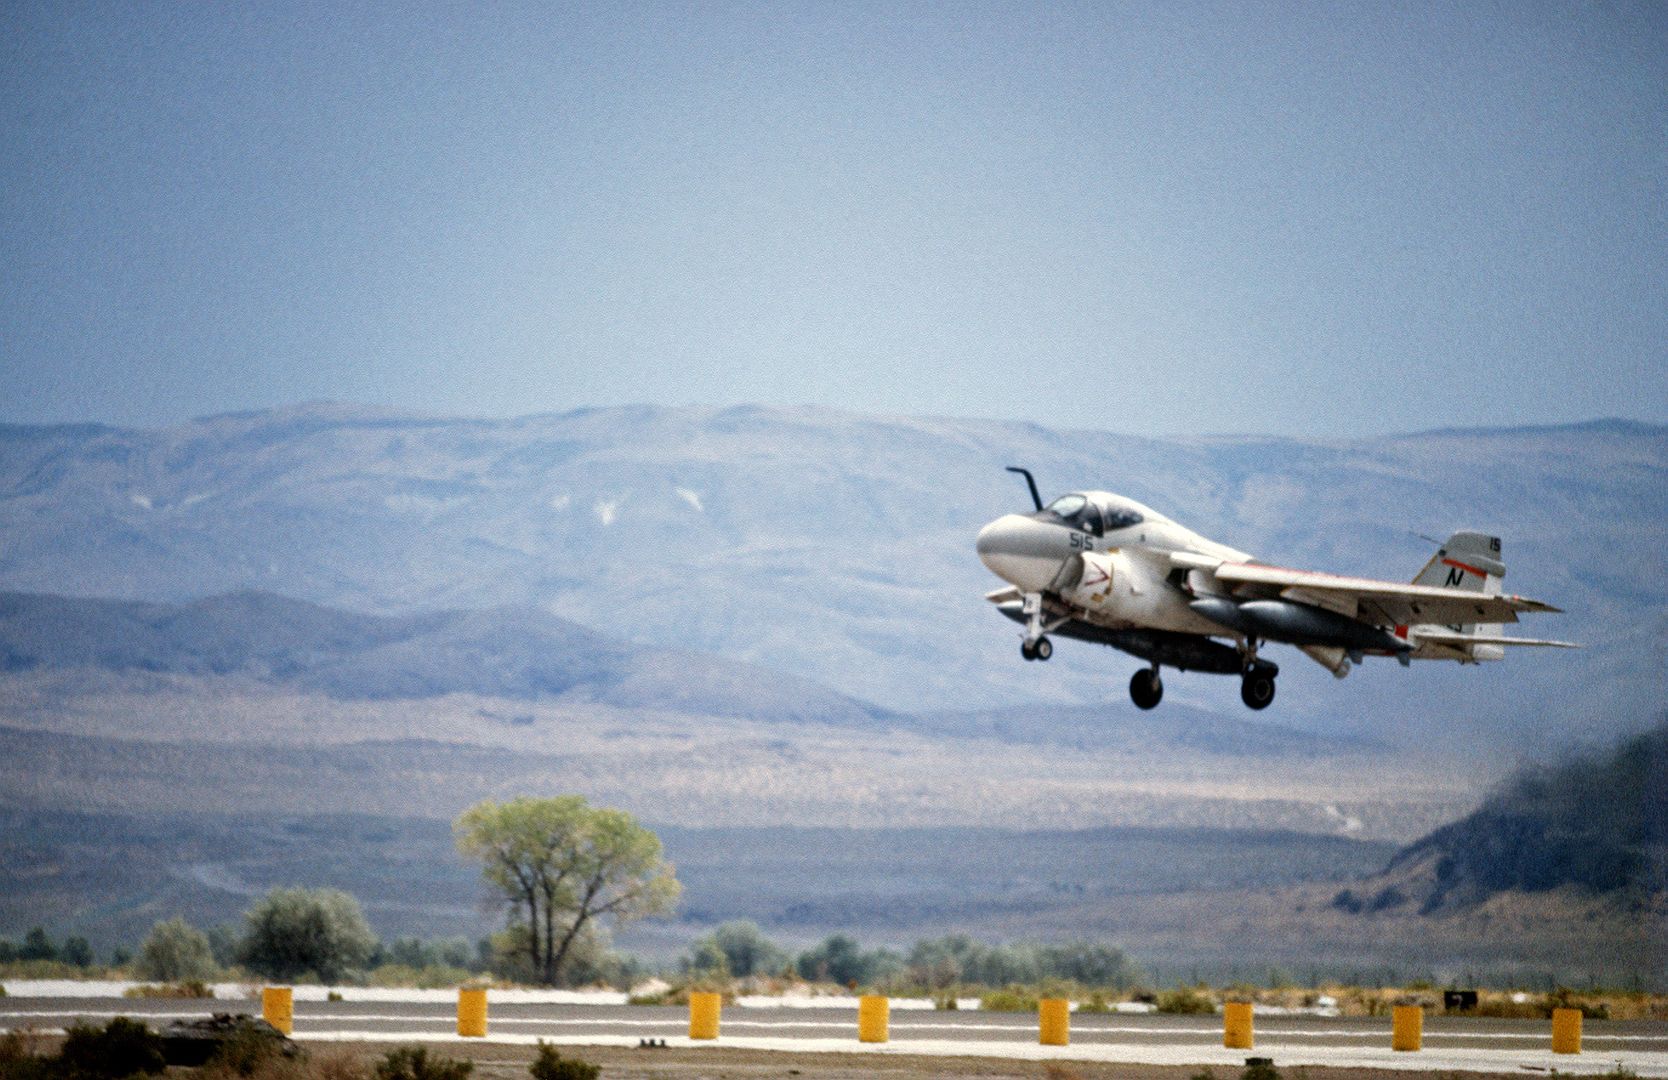 A KA 6D Intruder Aircraft Comes In For A Landing During Exercise GALLANT EAGLE 88